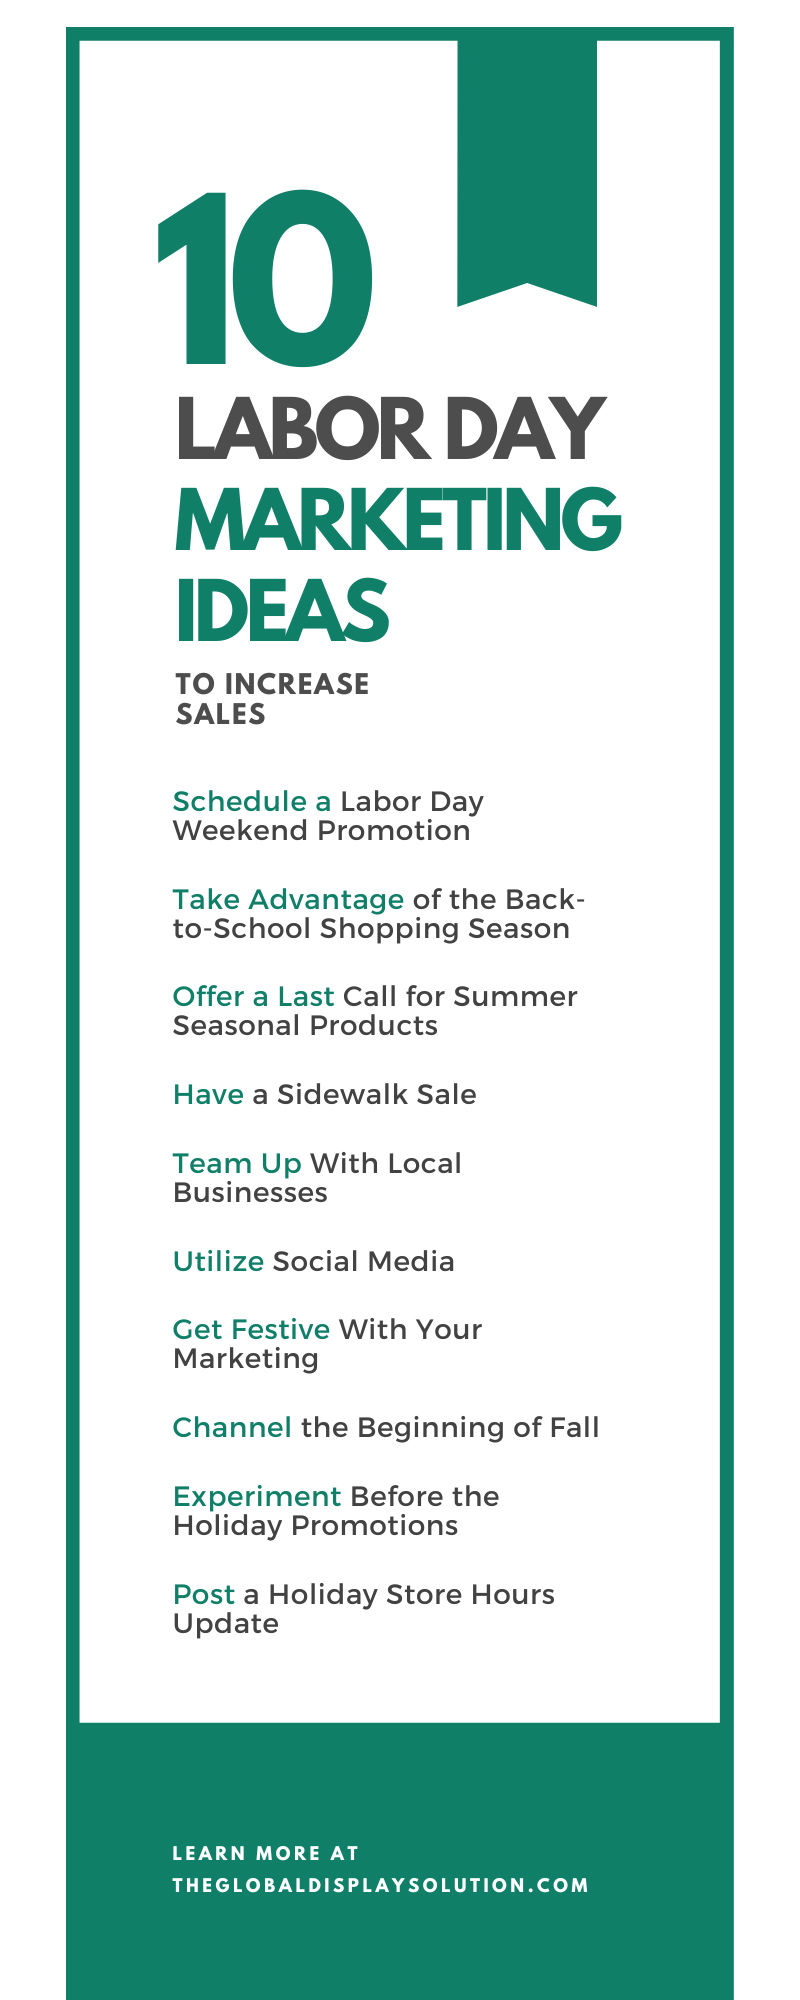 10 Labor Day Marketing Ideas To Increase Sales